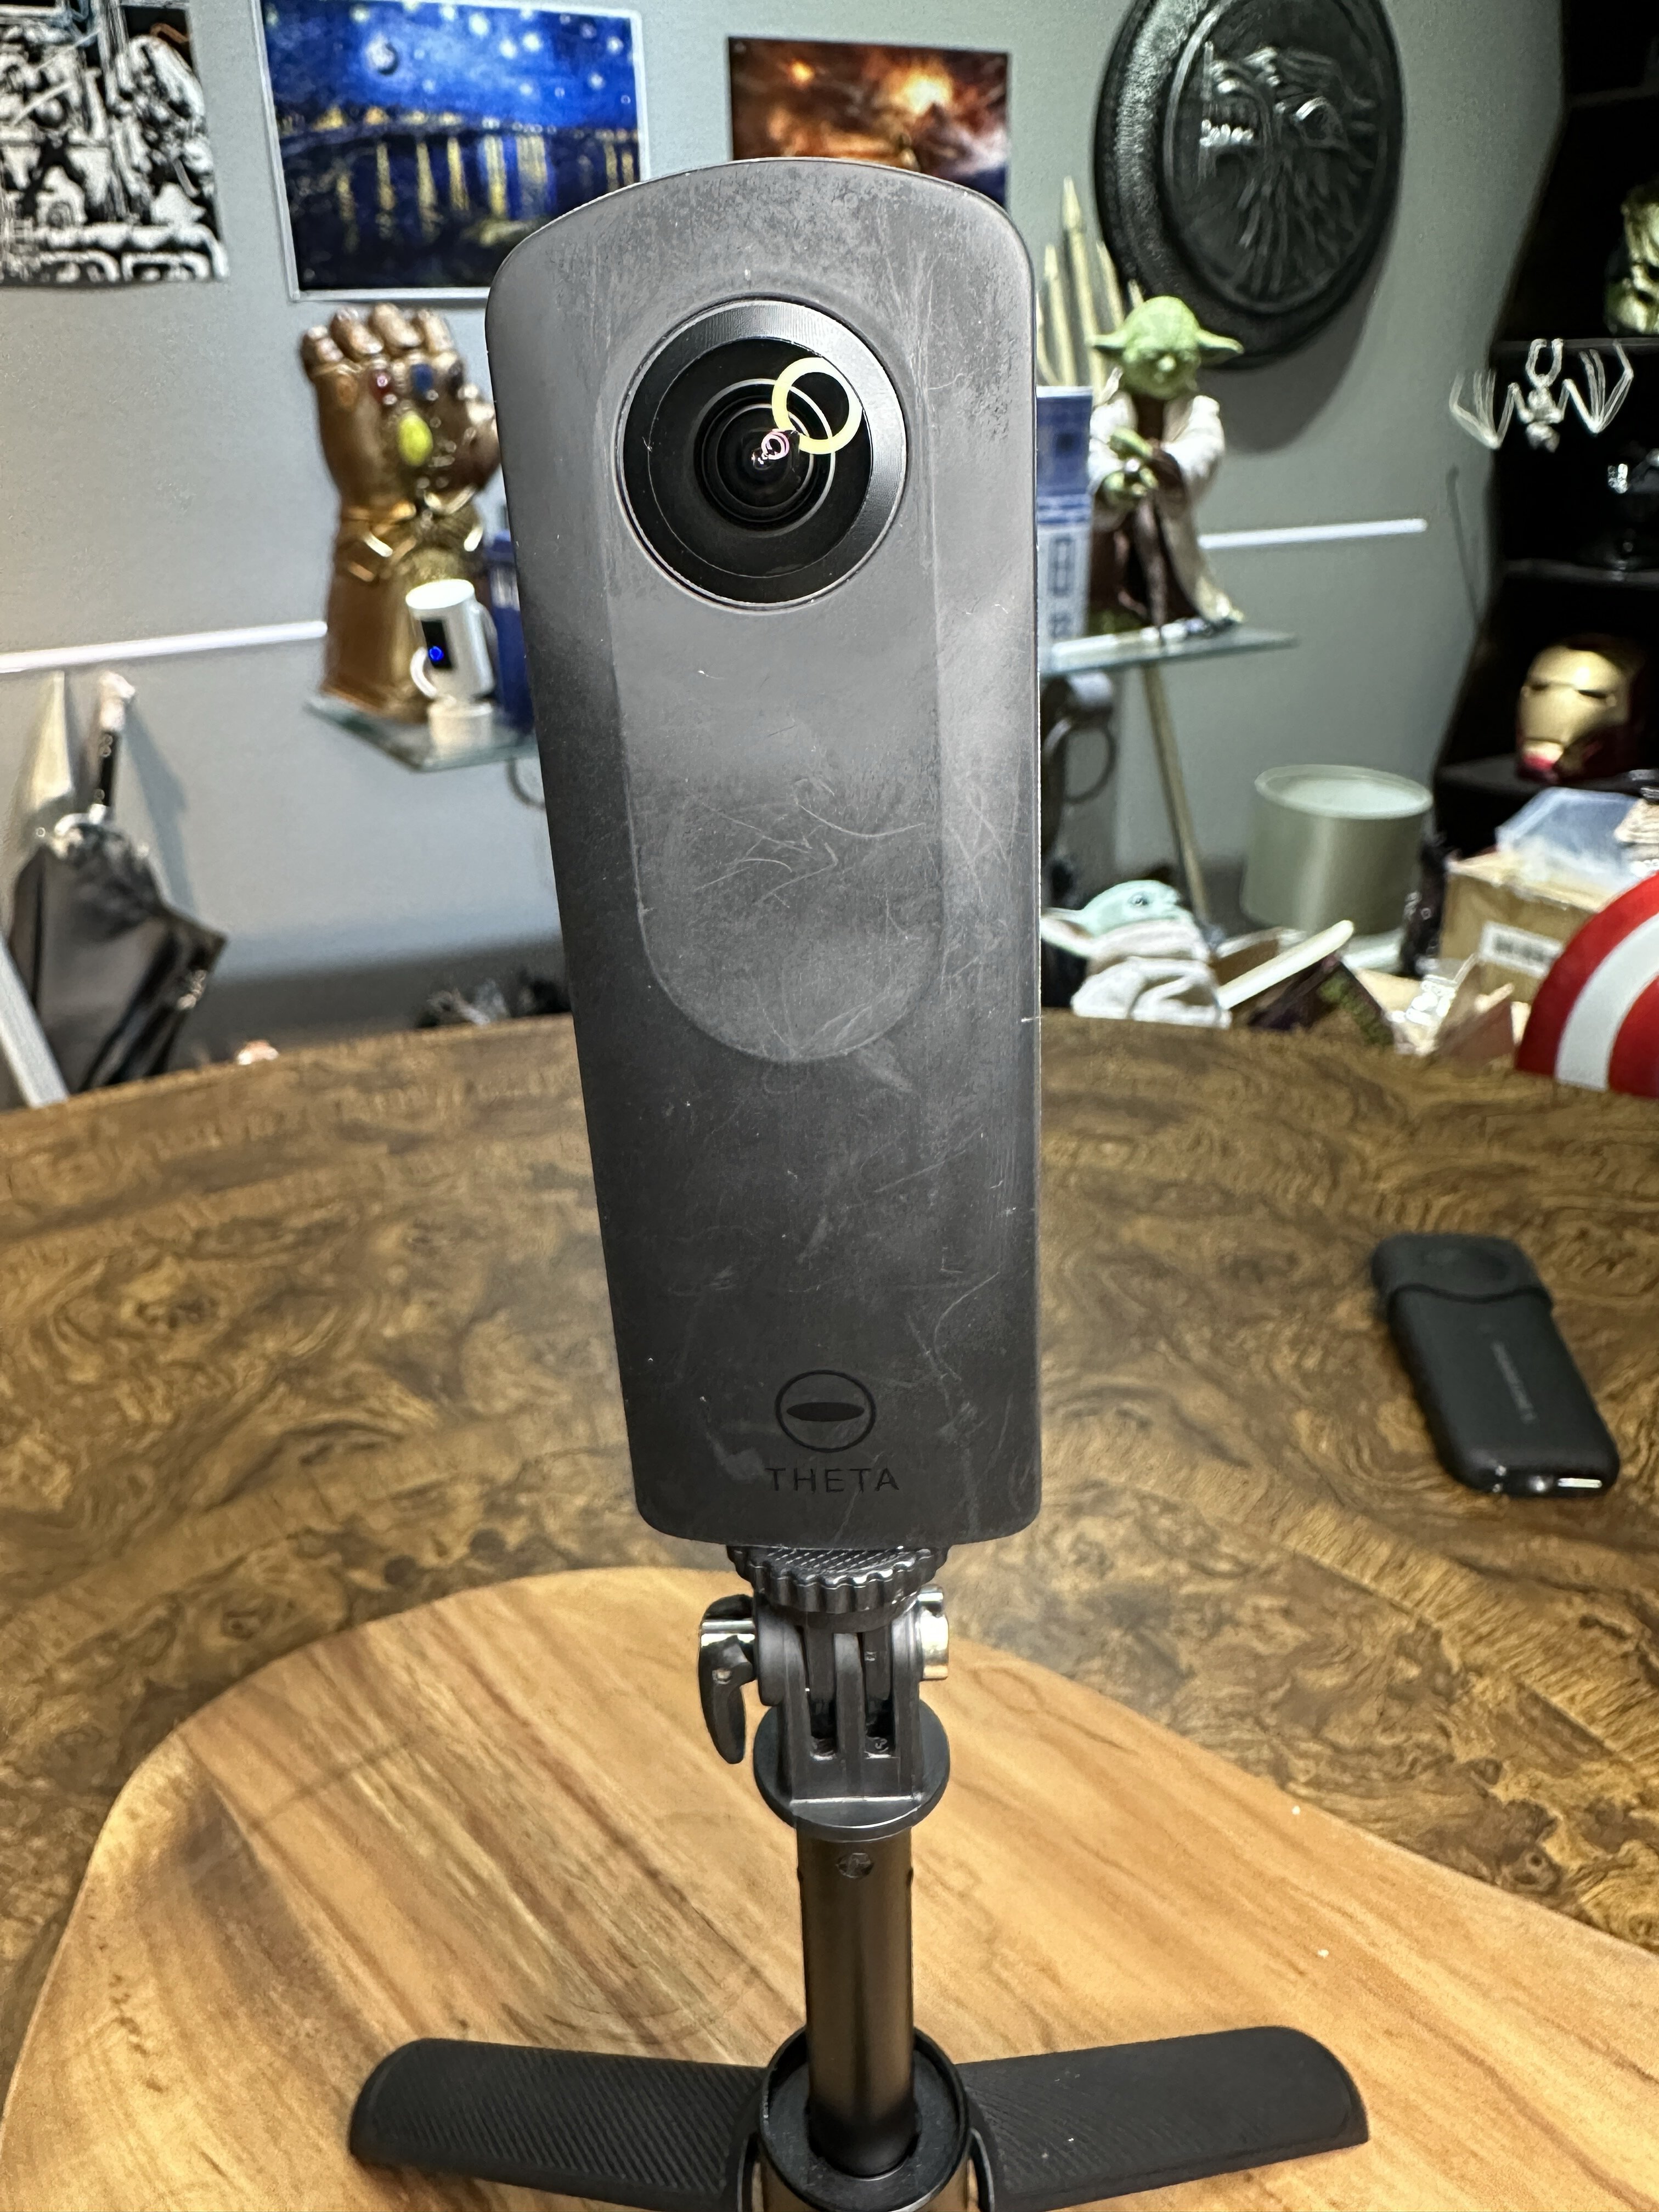 Ricoh Theta S . Older affordable 360 camera with SC2 coming out after.